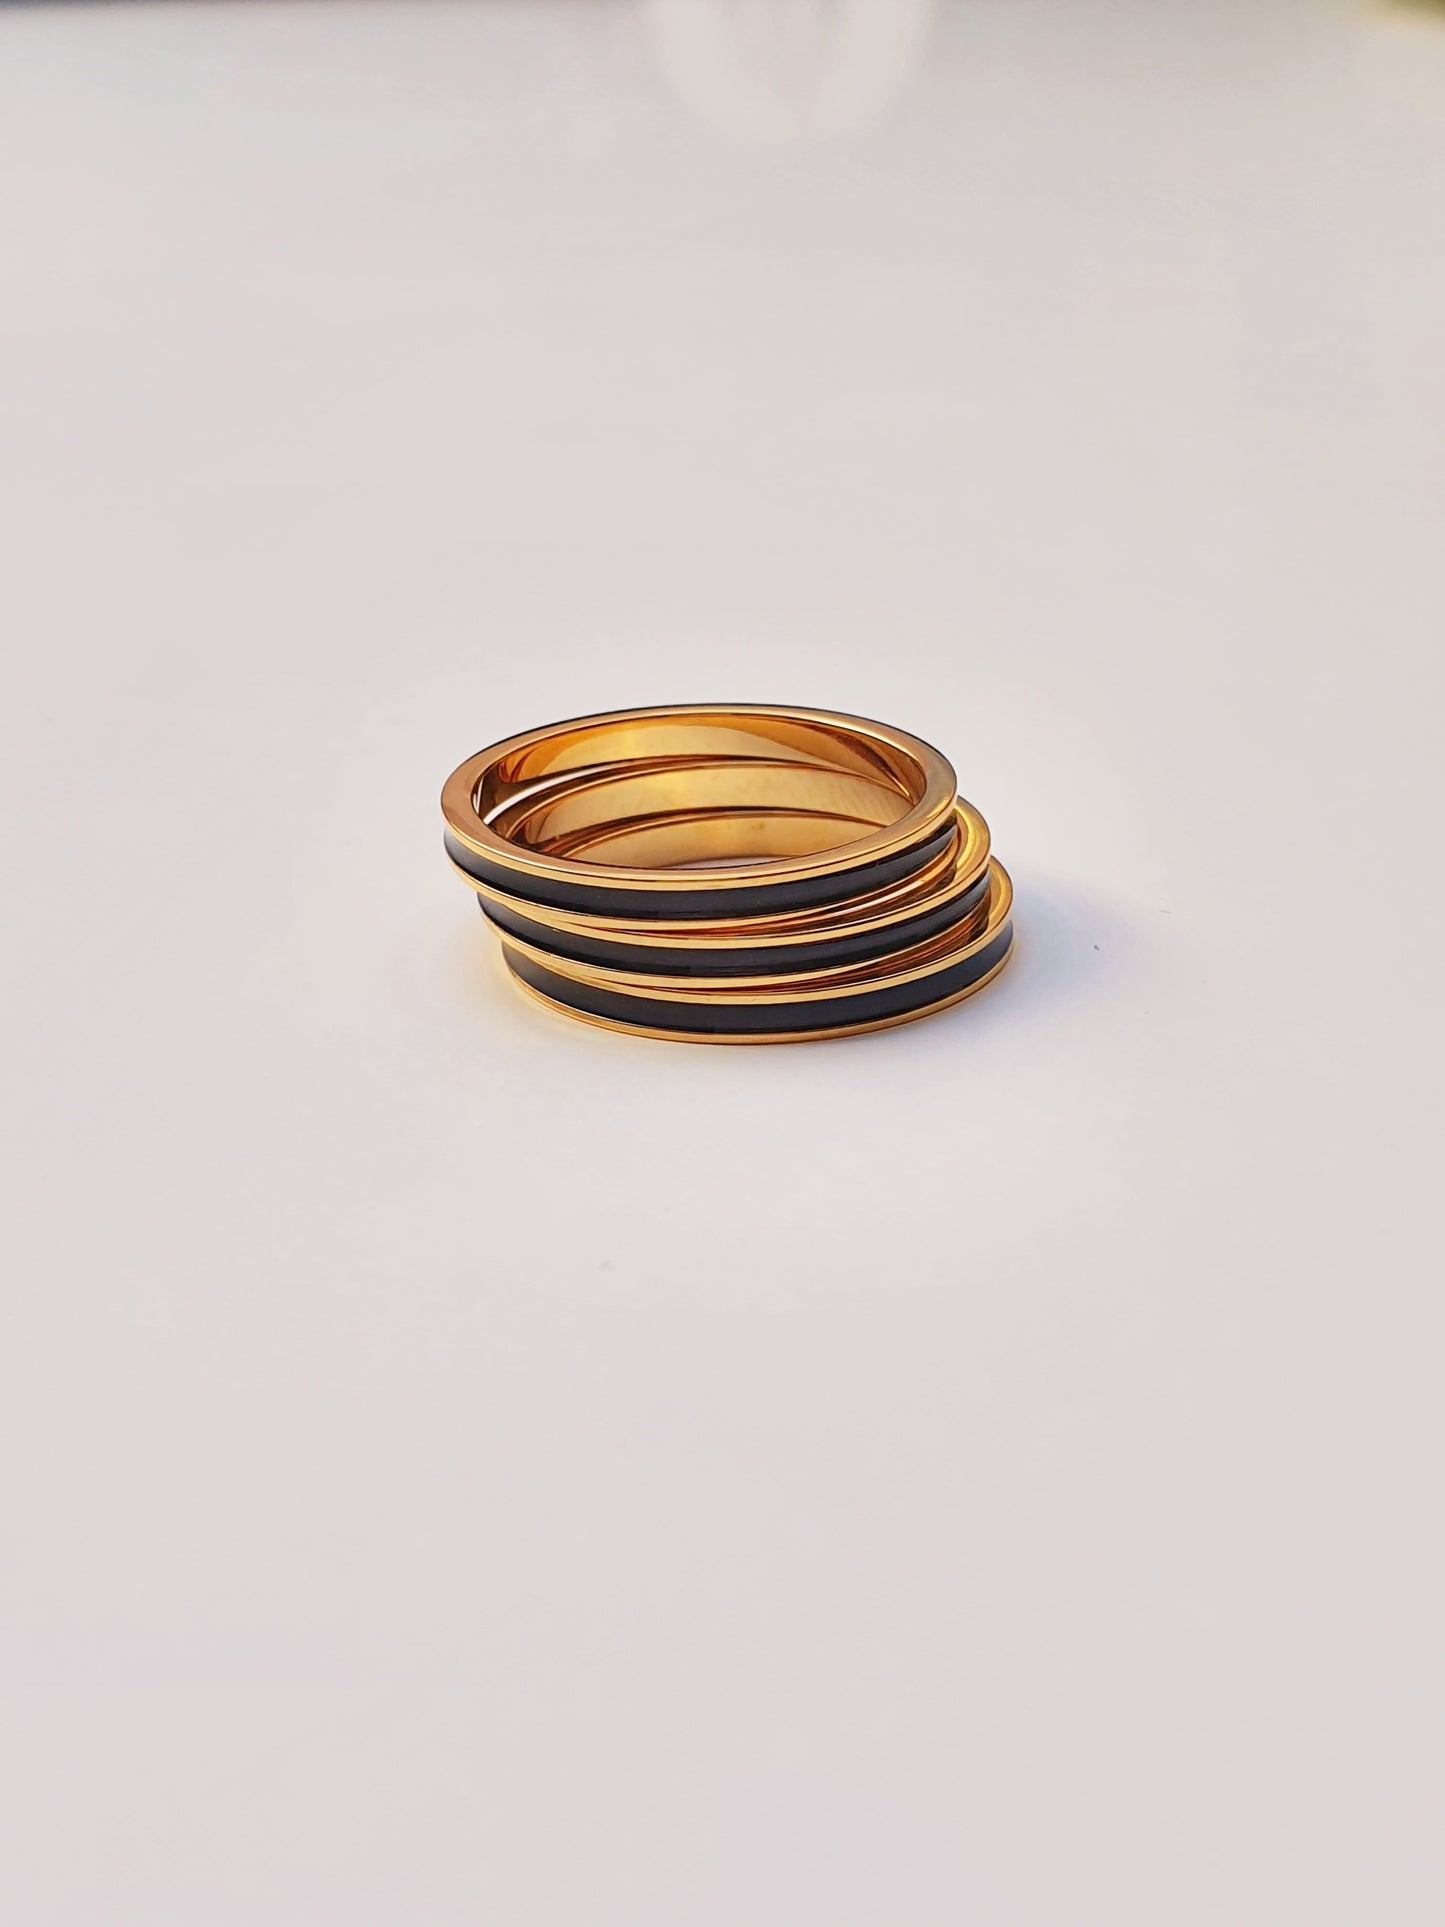 Three gold band rings with black enamel banding around the middle are stacked on top each other against a white background